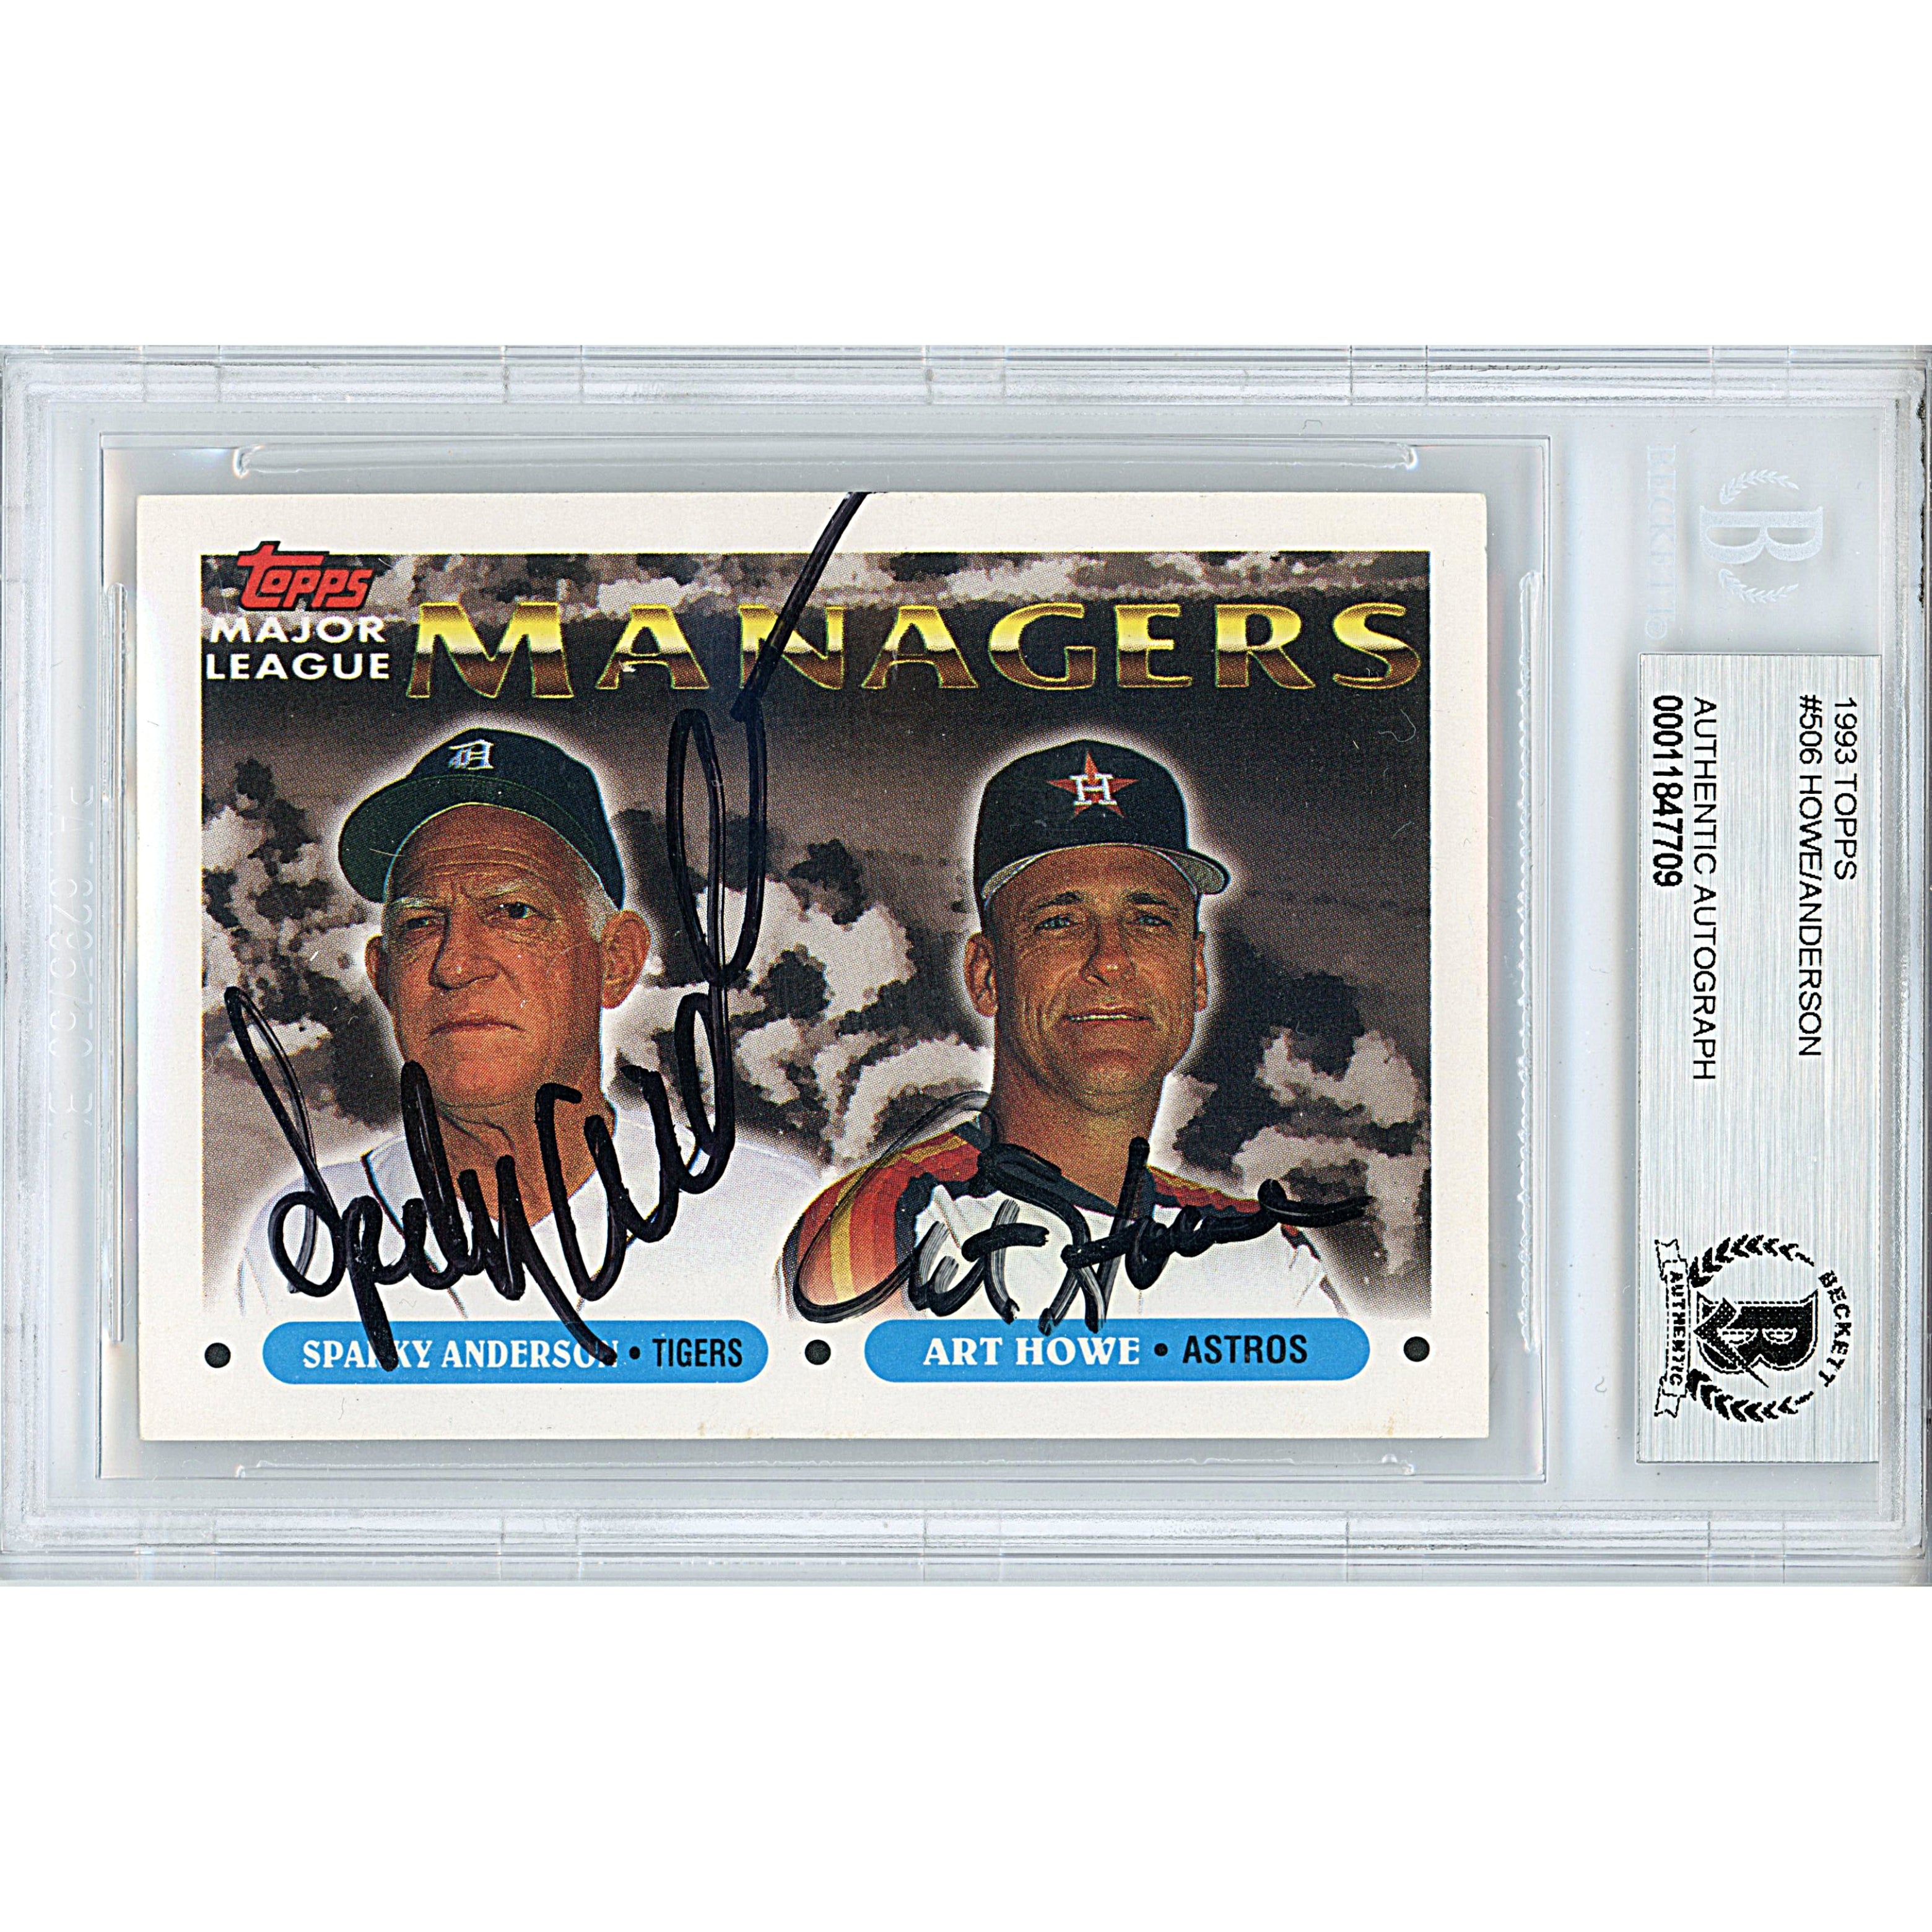 Art Howe and Sparky Anderson Signed 1993 Topps Baseball Card Beckett –  www.